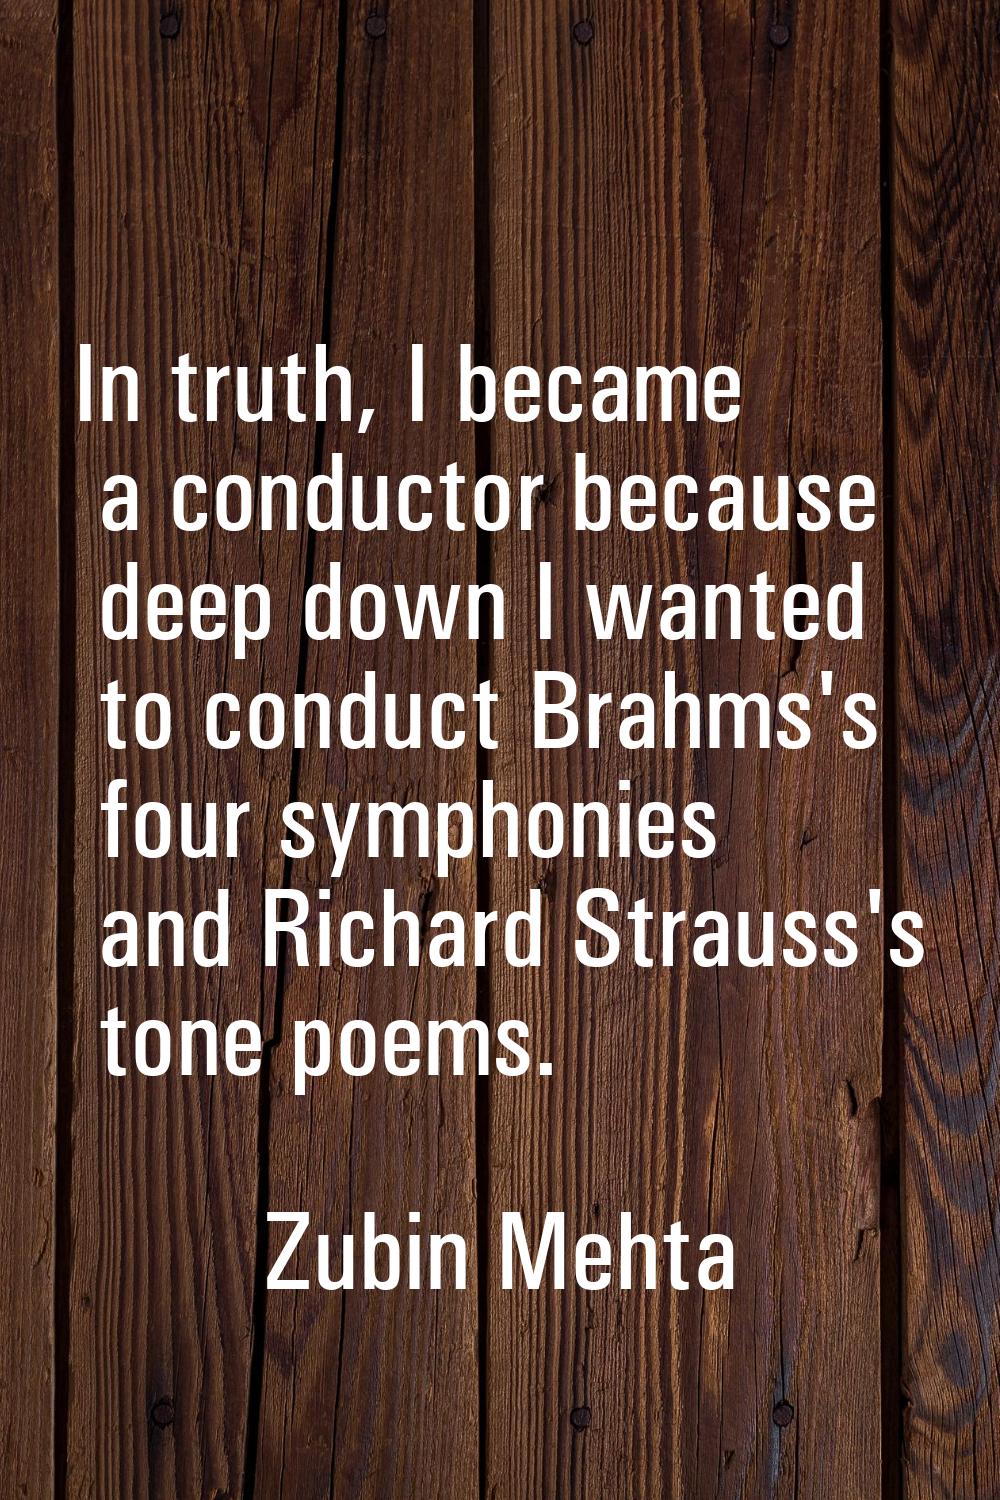 In truth, I became a conductor because deep down I wanted to conduct Brahms's four symphonies and R